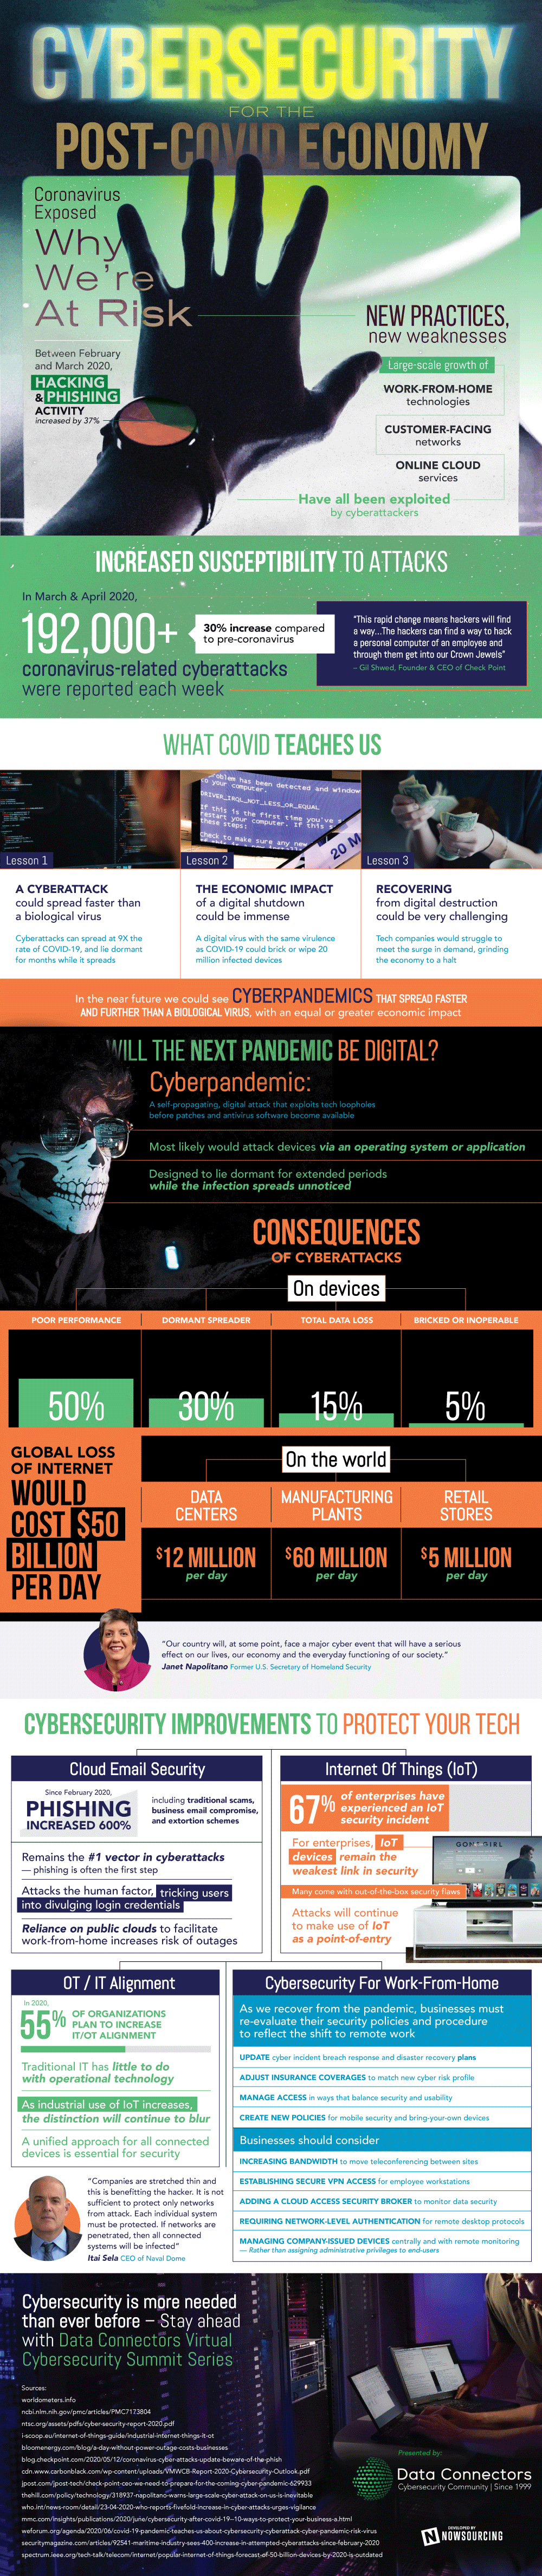 Are We Ready For a Cyber Pandemic? [Infographic]